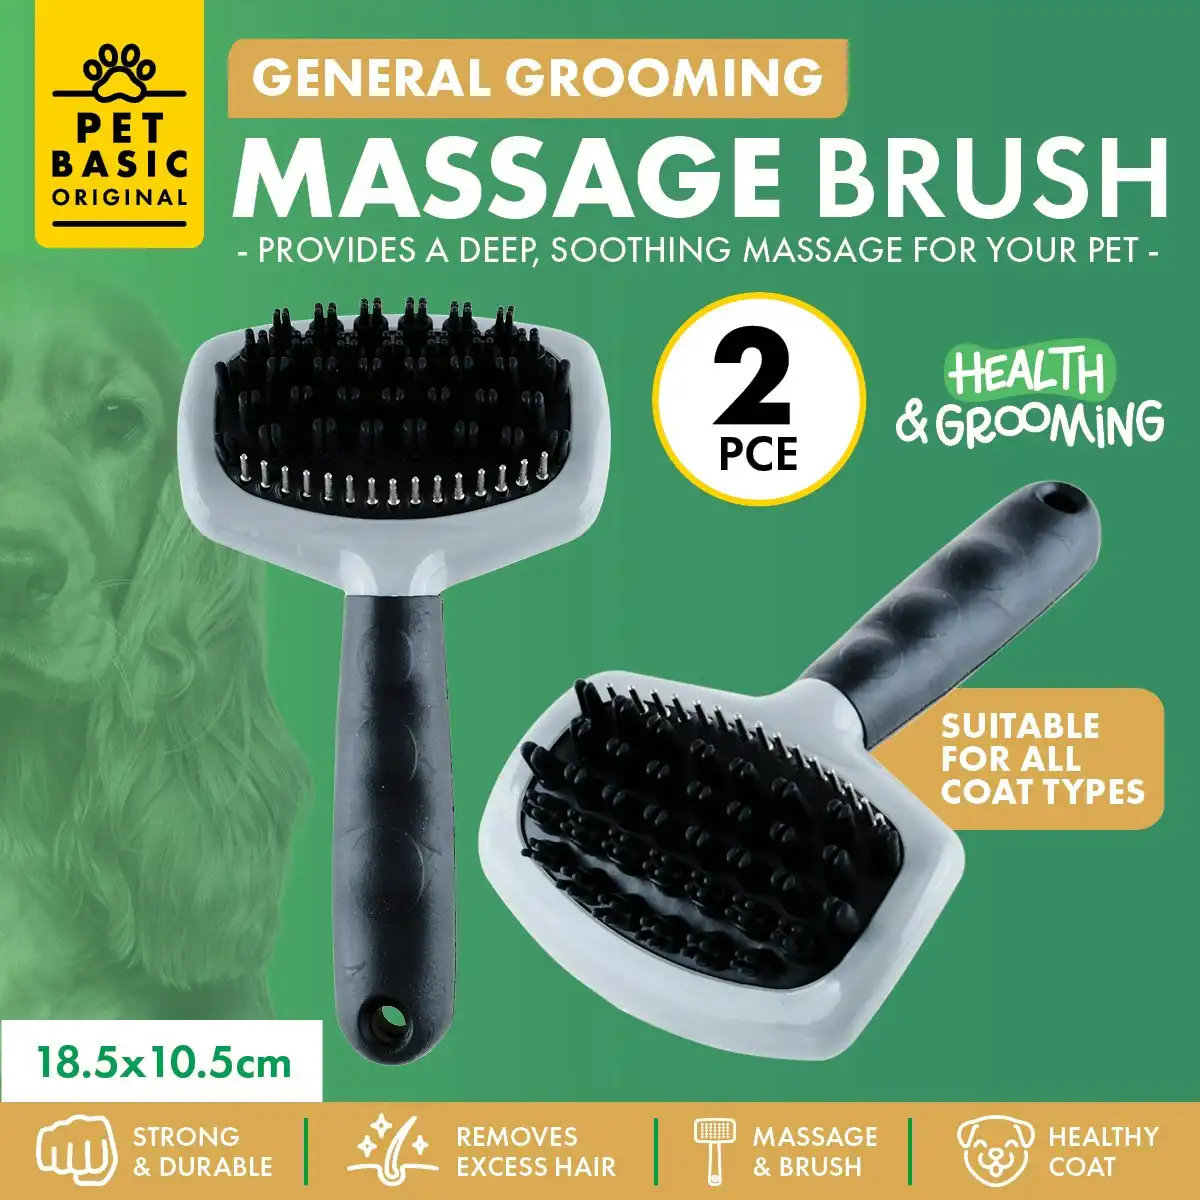 Pet Basic 2PCE Massage Grooming Brush Soothing & Gentle Wet Or Dry 18.5cm